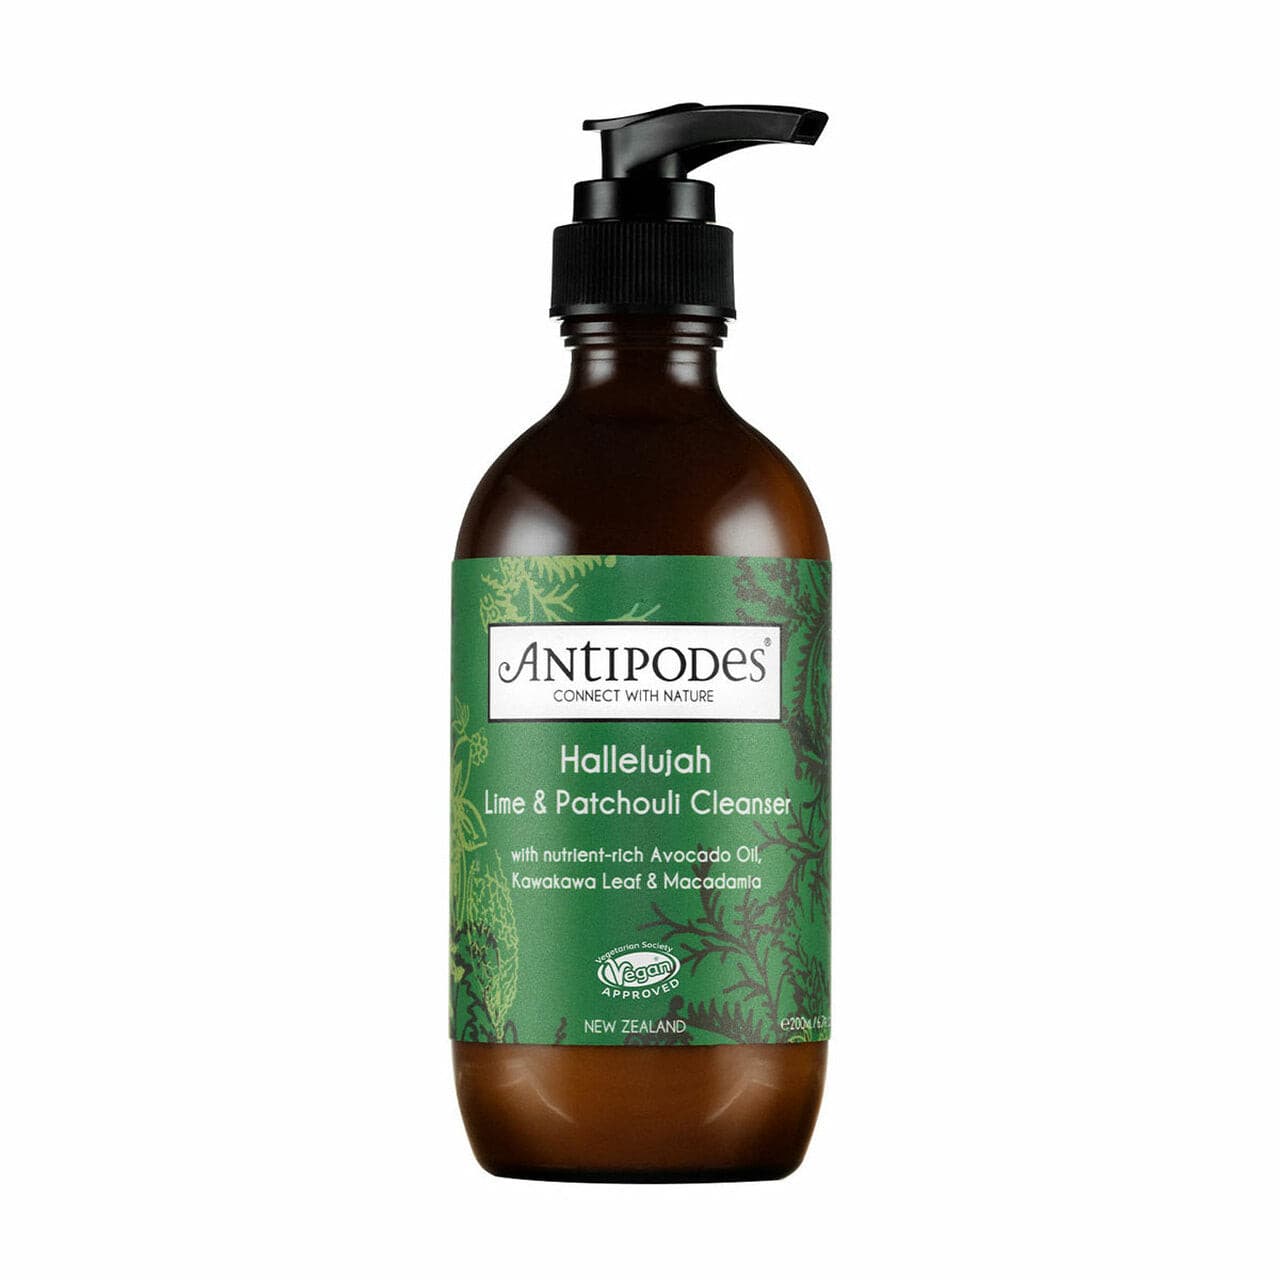 Antipodes Hallelujah Lime & Patchouli Cleanser 200ml.